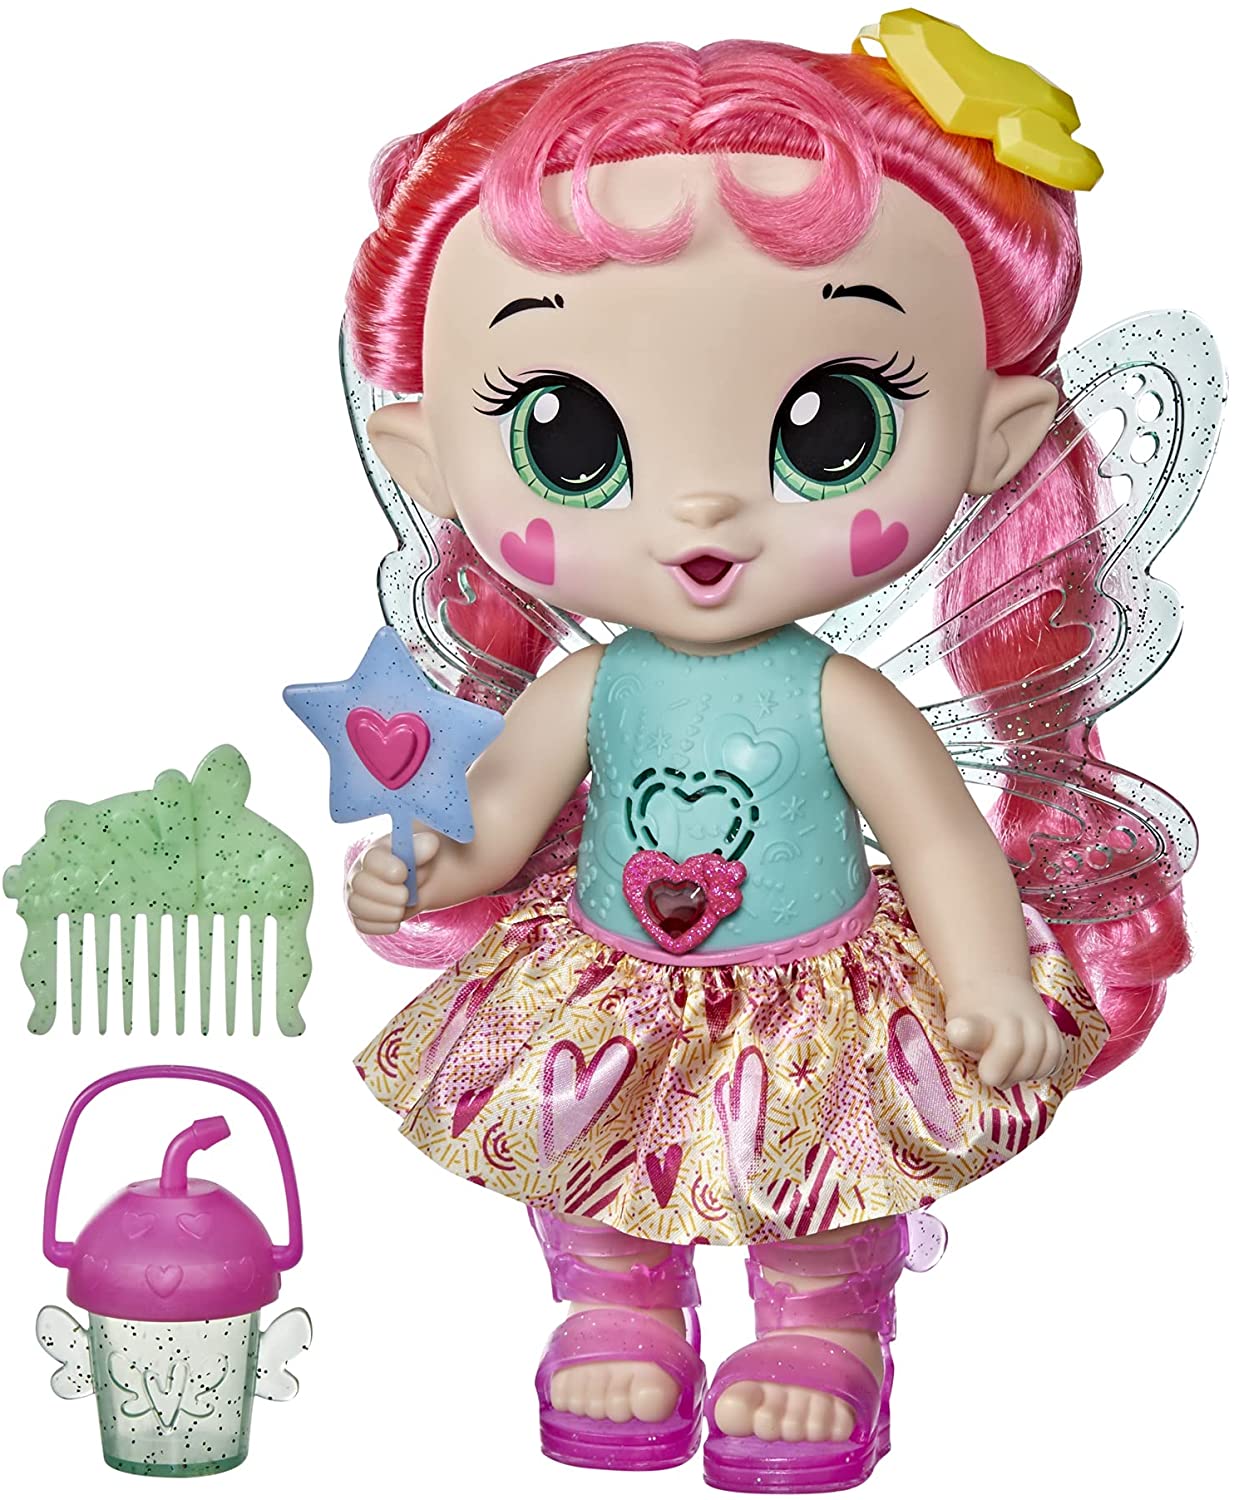 11.5 "Baby Alive Glo Pixies Dolls: Sammie Shimmer $15.39, Gigi Glimmer $15.39 + Free Shipping w/ Prime or on $25+